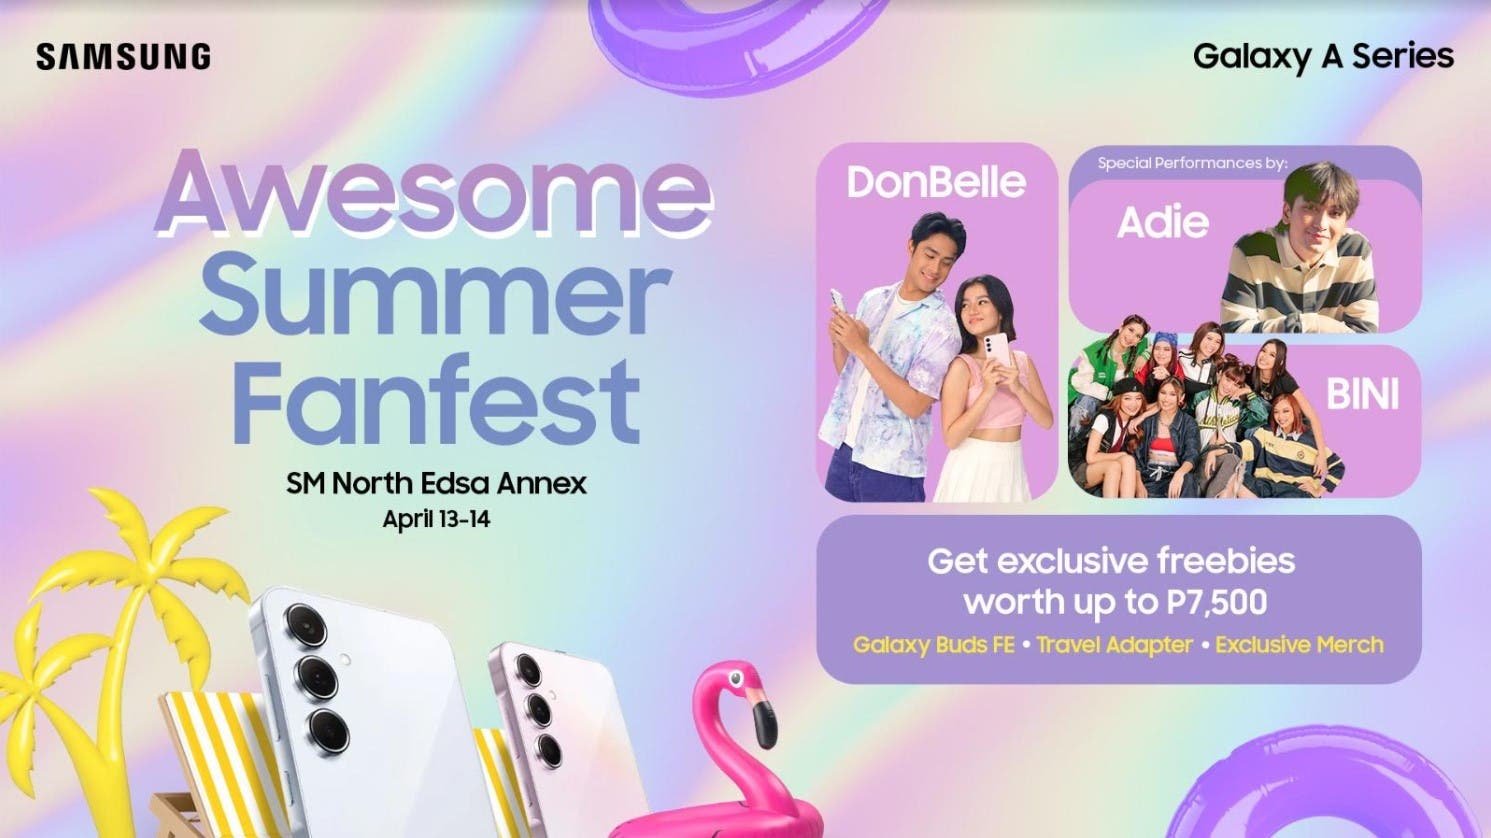 DonBelle BINI and Adie Headline Samsungs Awesome Summer Fanfest